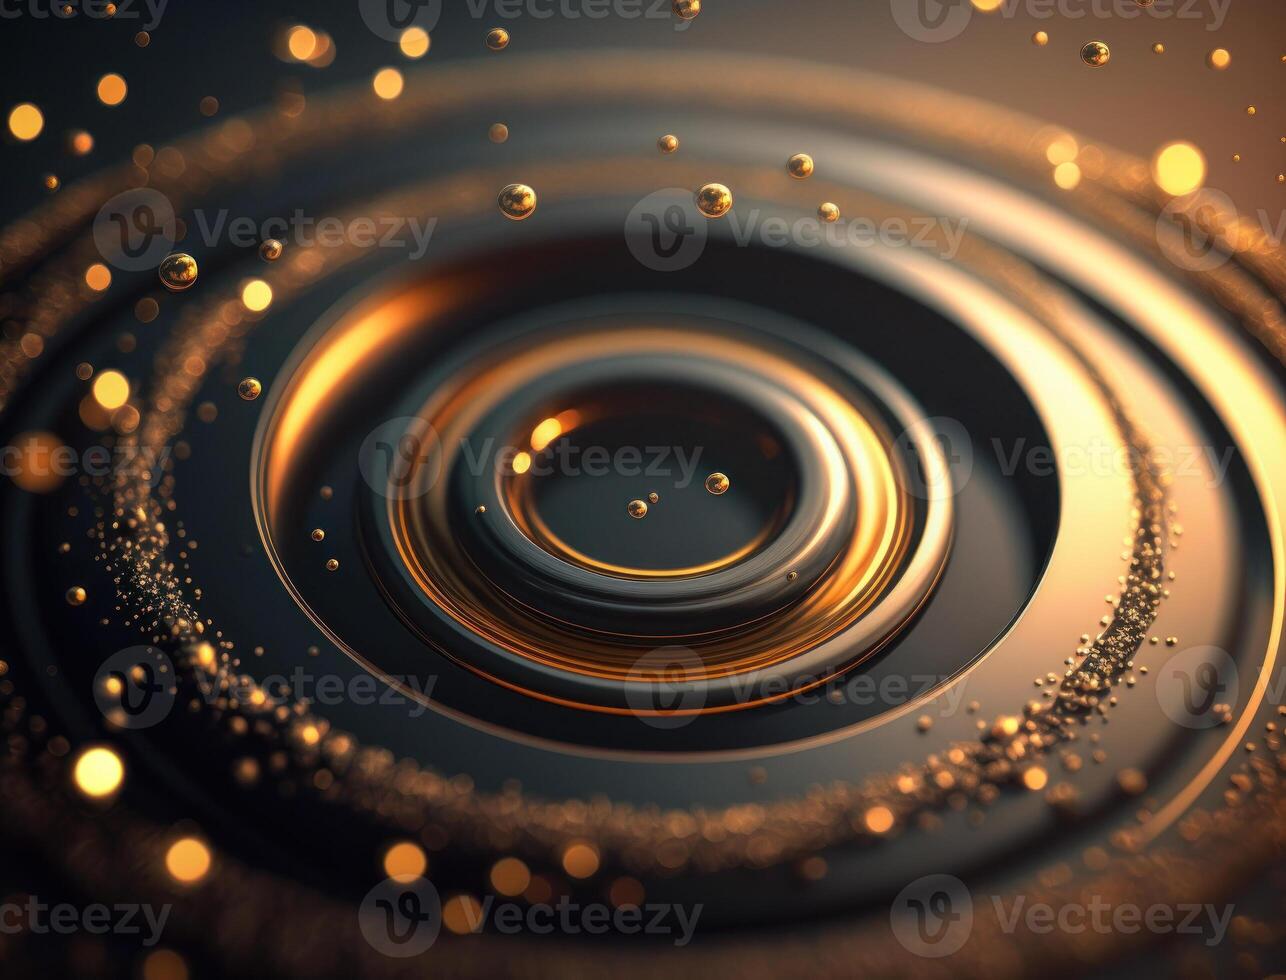 Concentric golden rings shapes Abstract geometric background created with technology photo